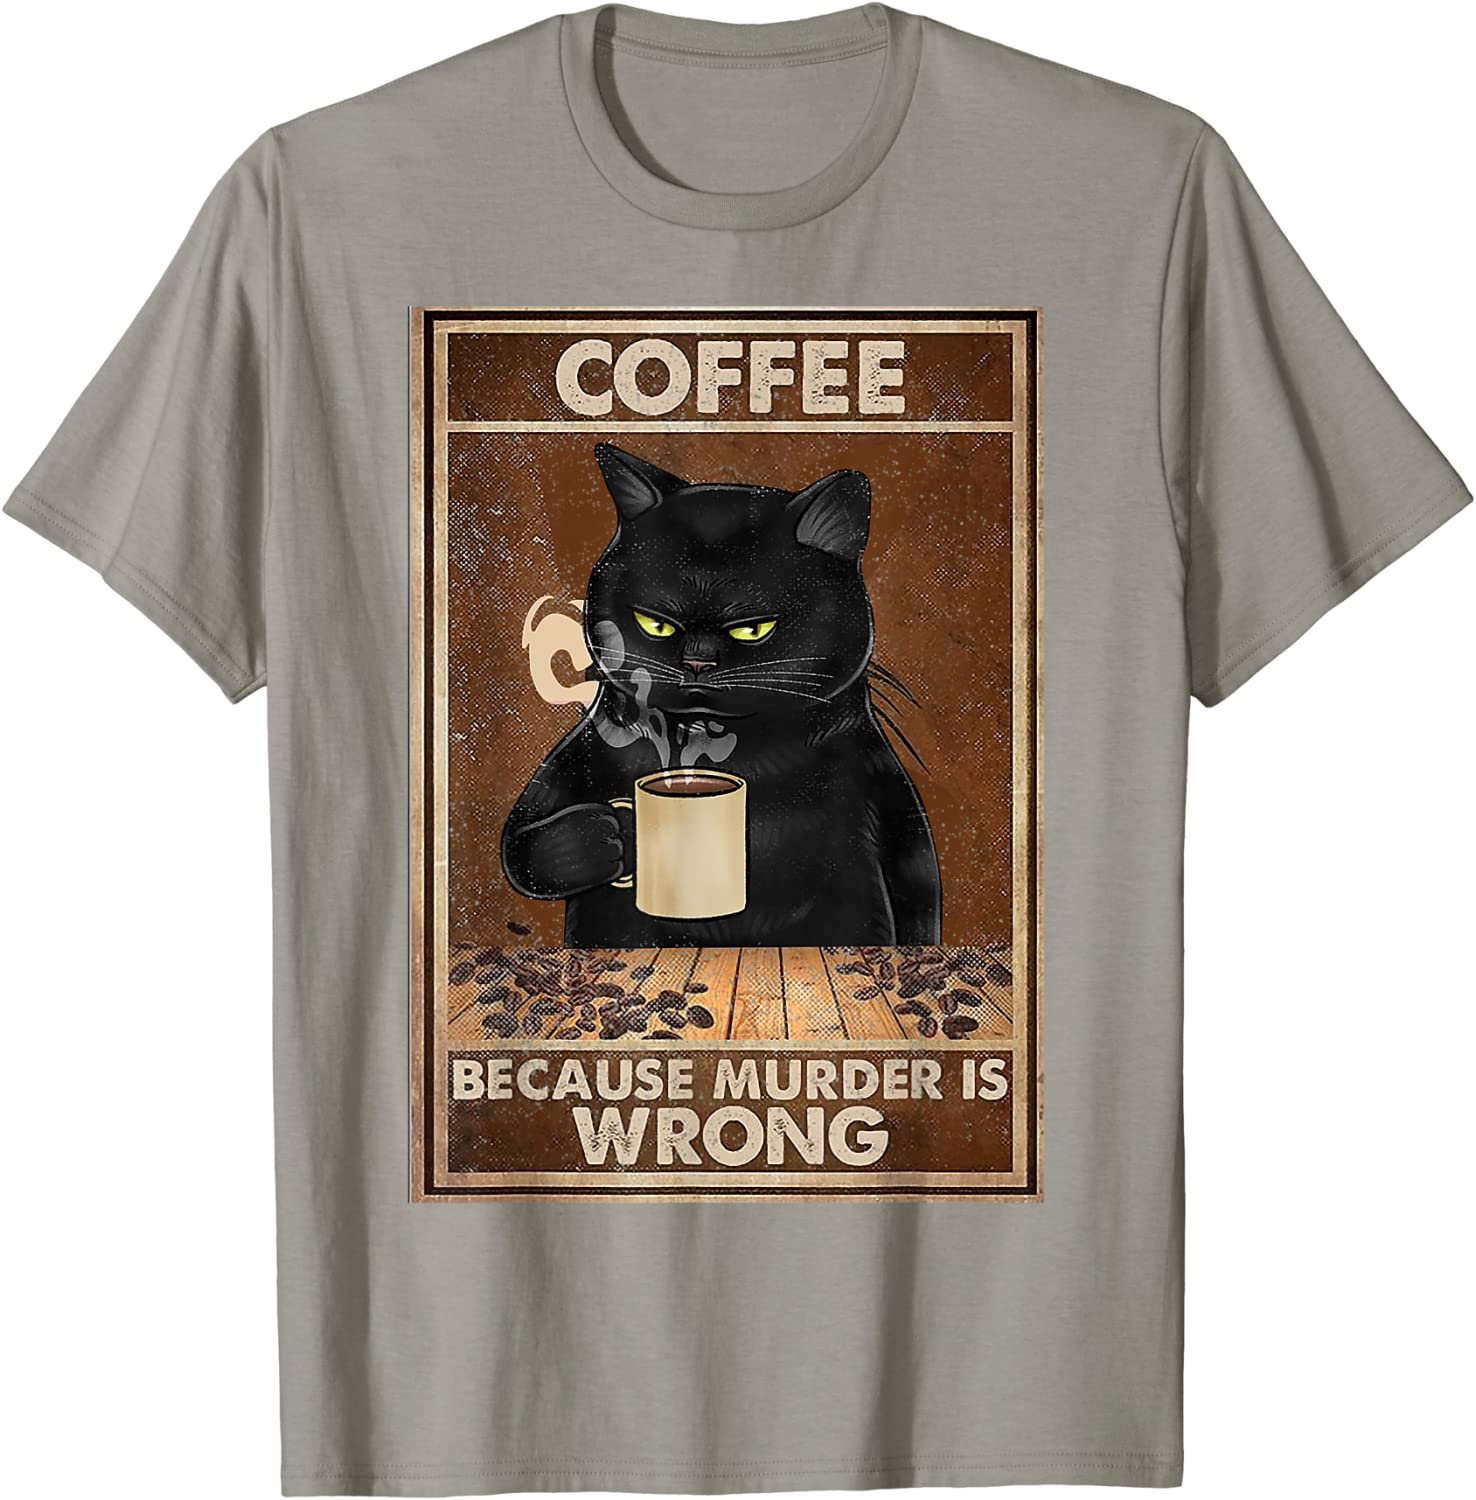 Cat-themed "Black Cat and Coffee" tee in stylish design